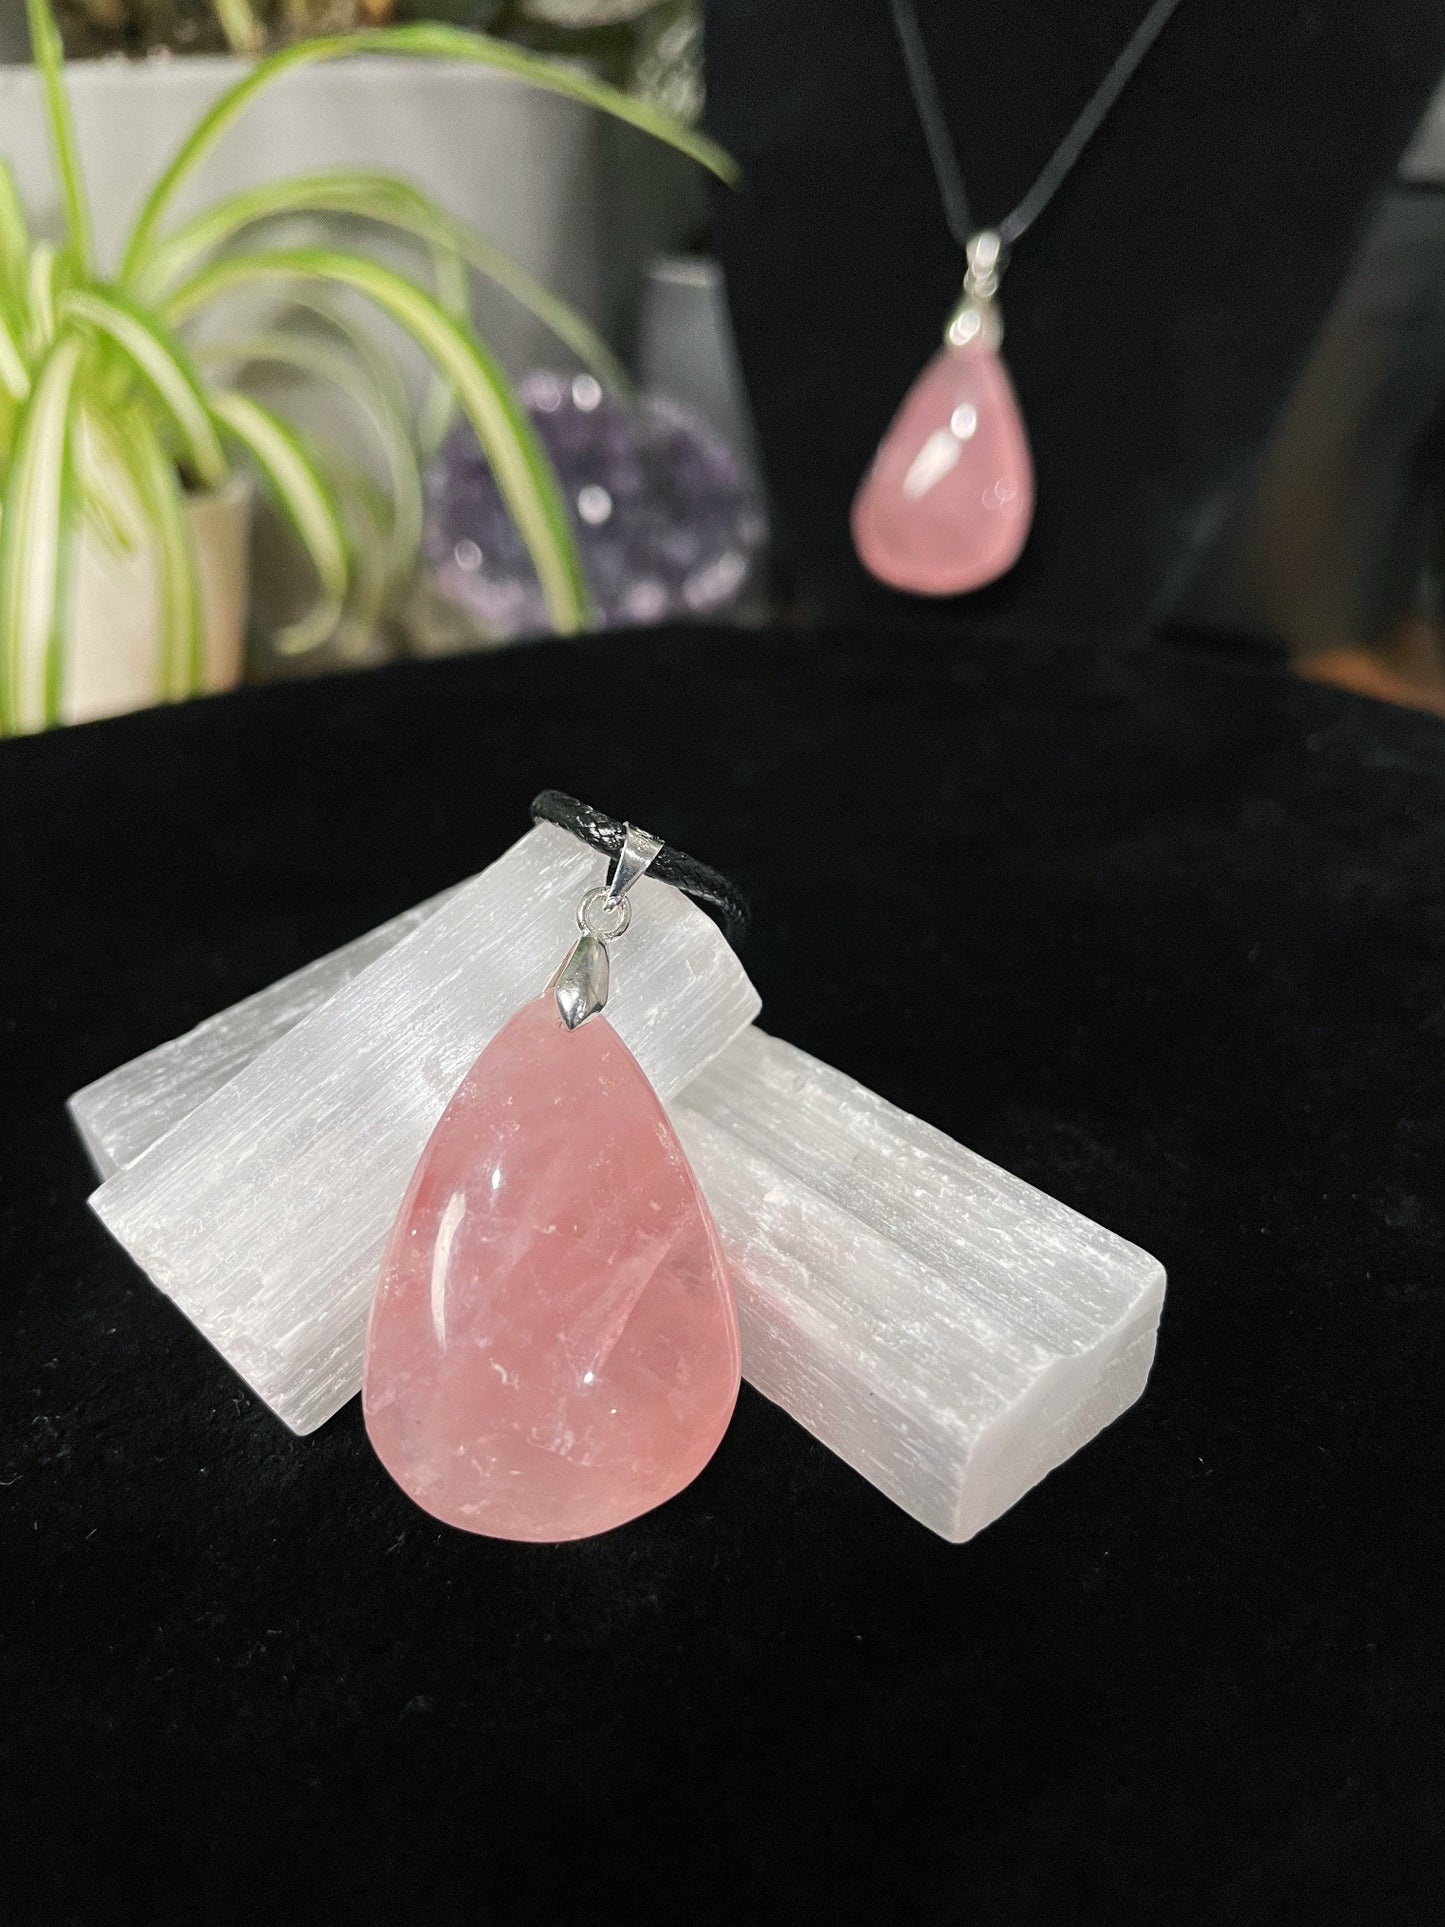 An image of a pink rose quartz teardrop shaped pendant on a necklace. It sits atop some selenite chunks and a black velvet surface.